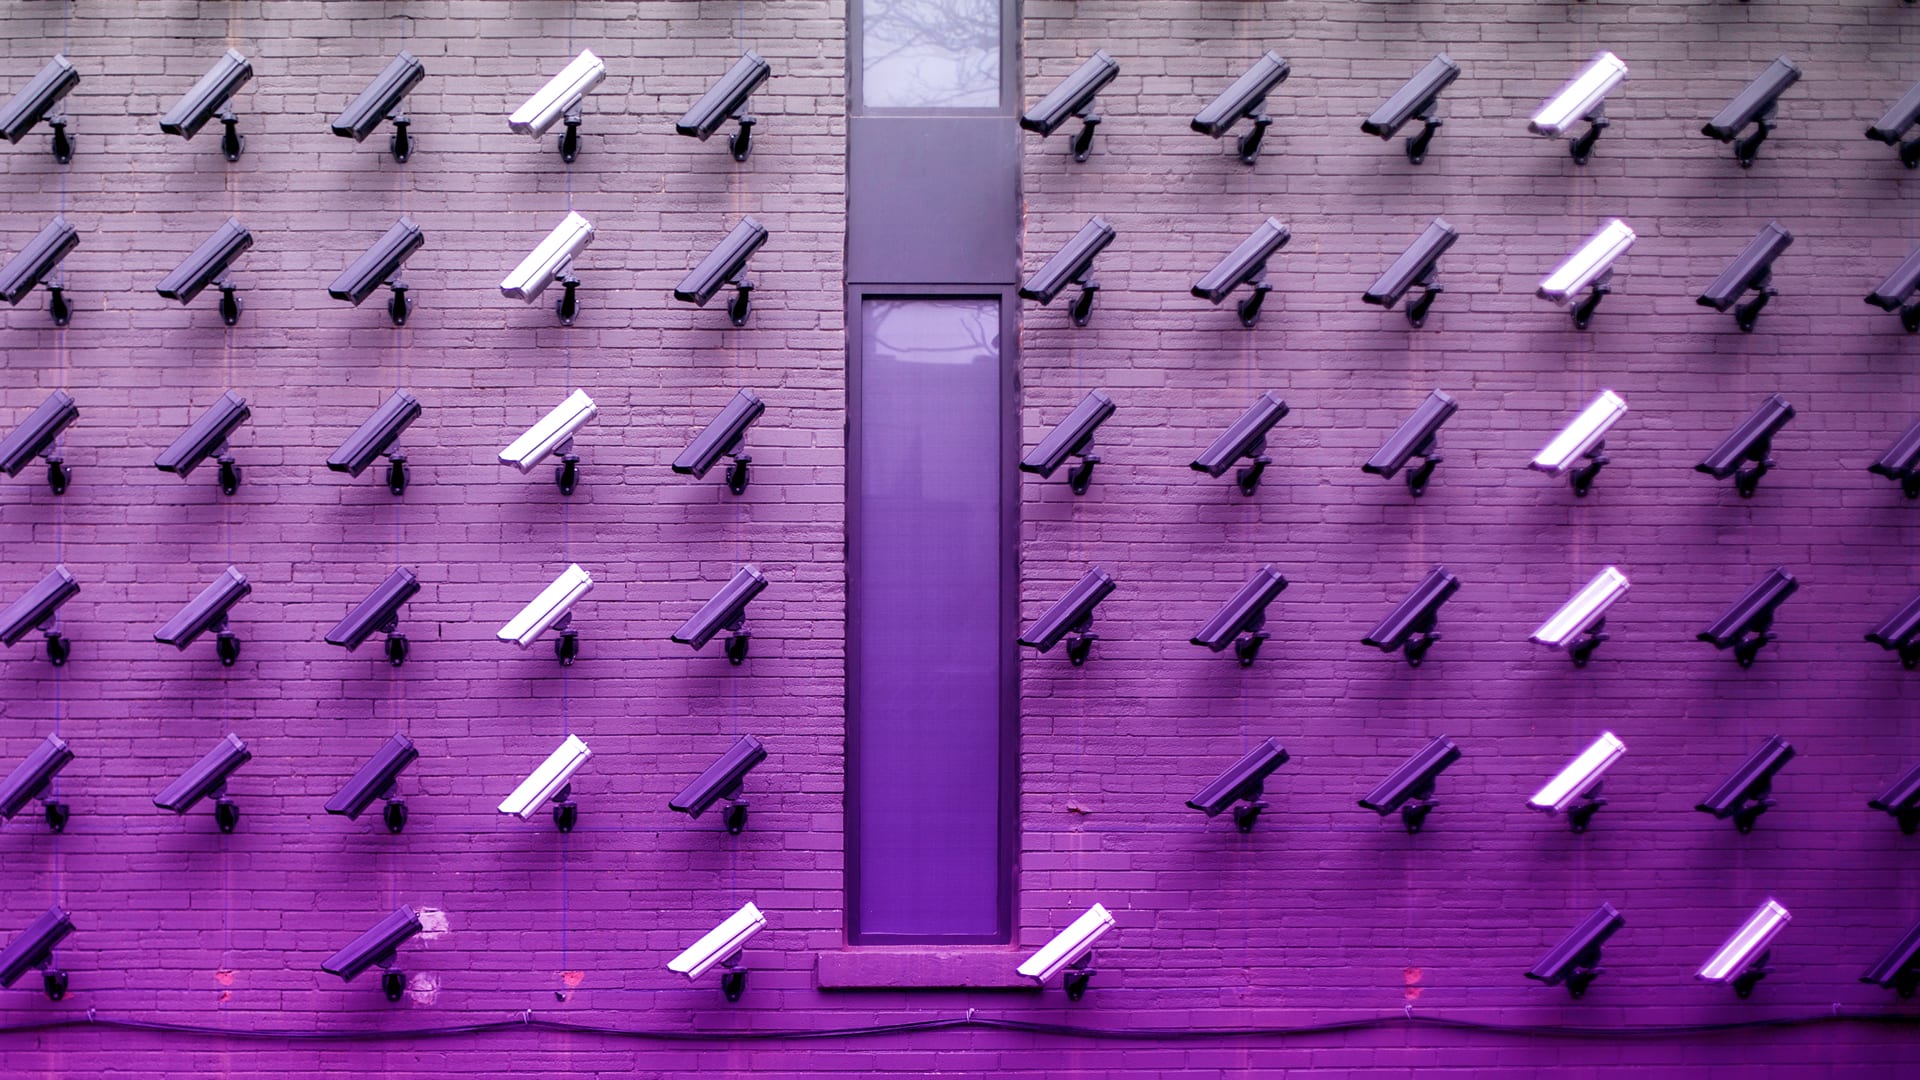 These 2 loopholes in the new spying bill help the U.S. spy on Americans